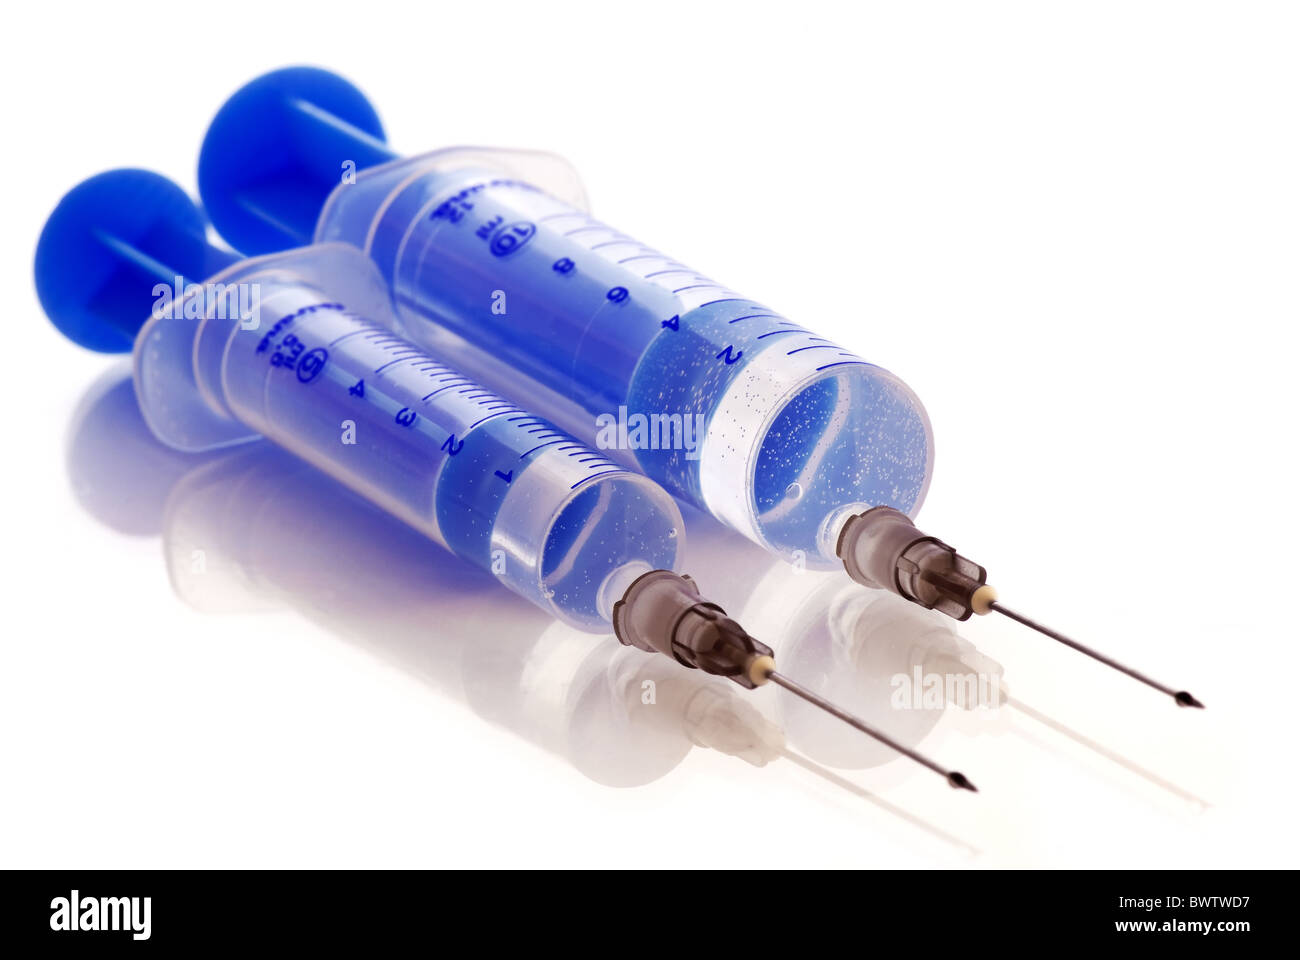 2 blue injections as closeup on white background Stock Photo